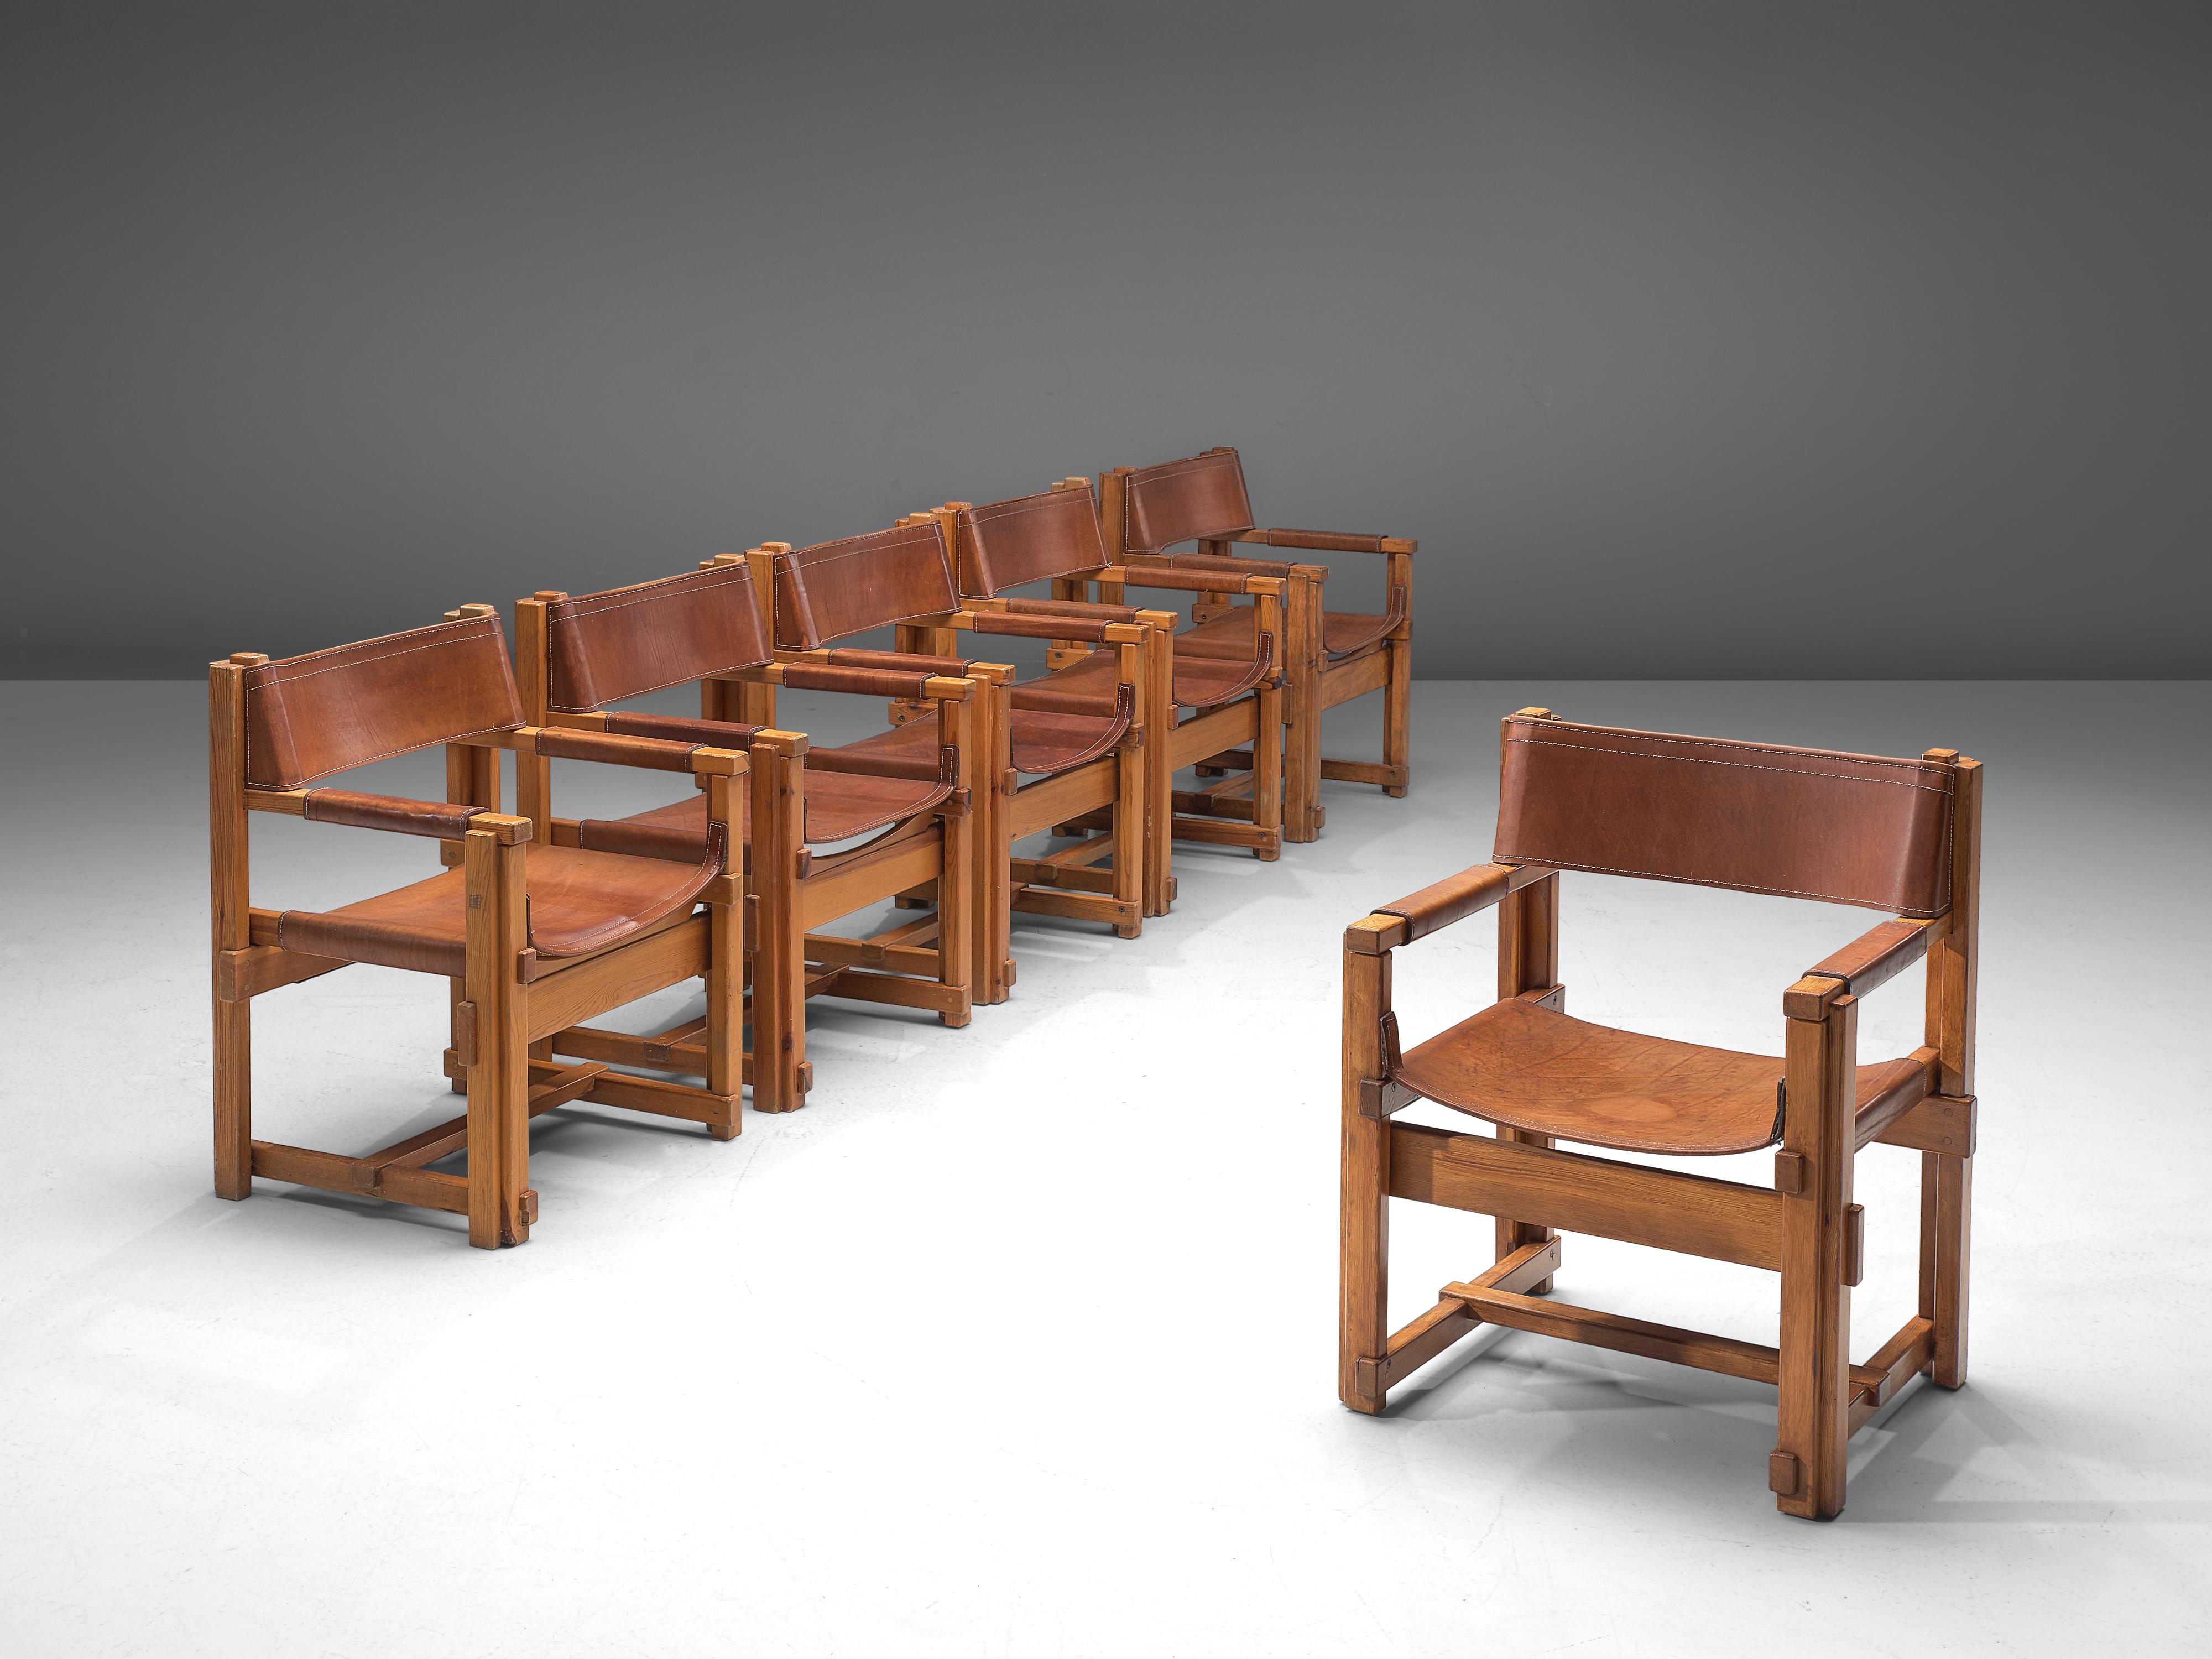 Joan Pou, set of six armchairs, pine and leather, Spain, 1960s

This set of six armchairs from Spain is strict, purist and belongs to the rationalist movement in Spain. The chairs feature an architectural frame, build up from only horizontal and